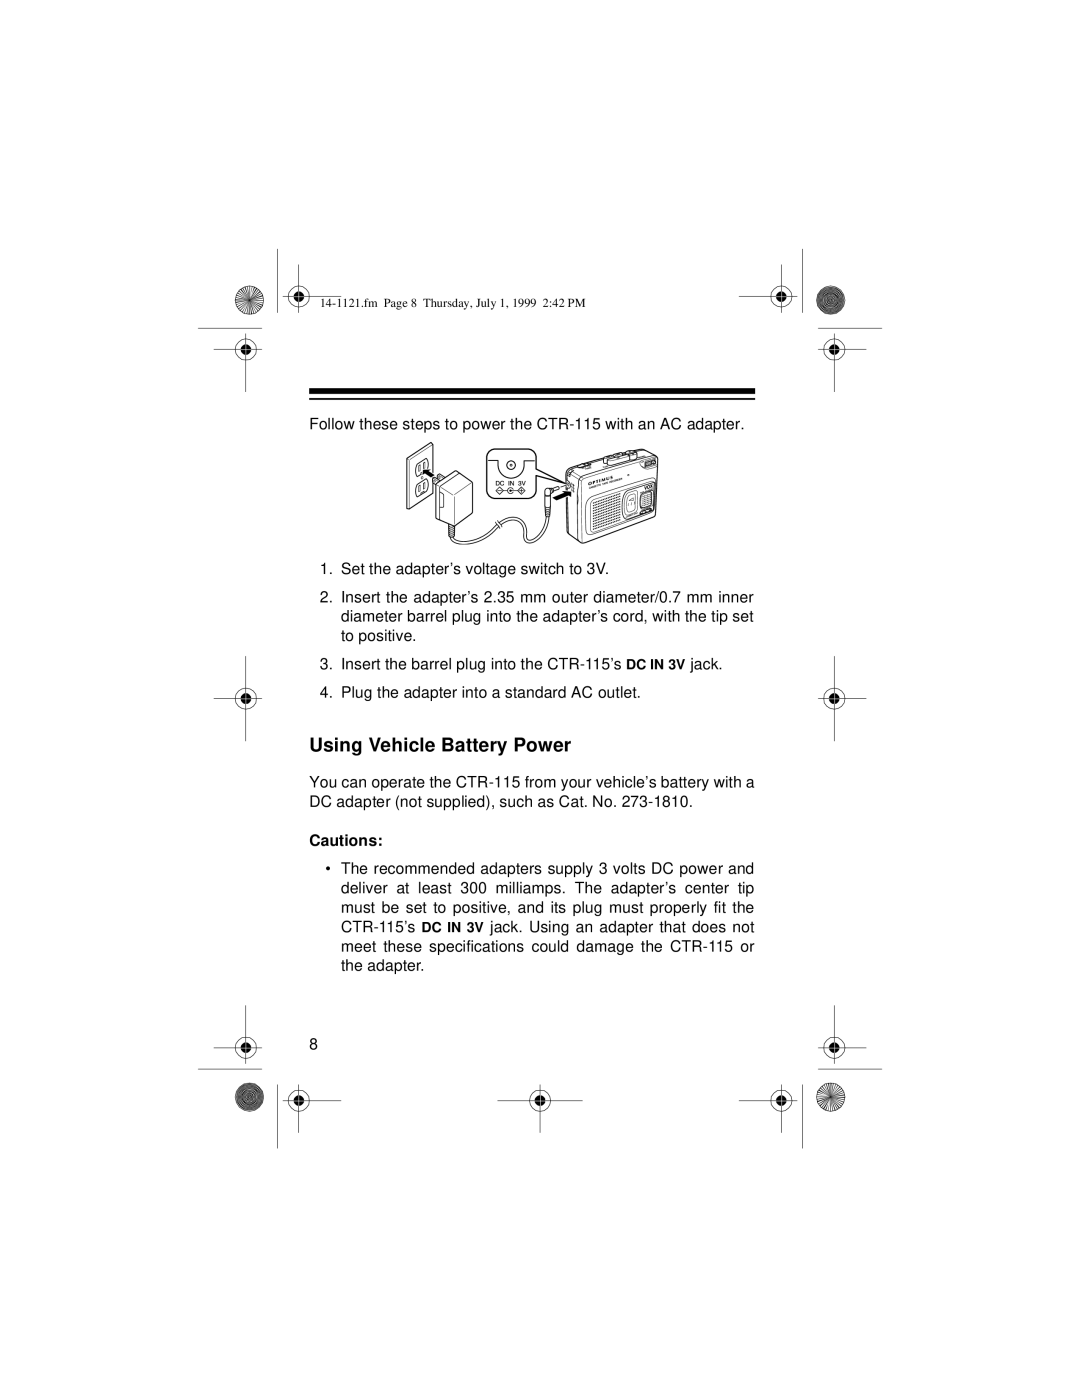 Optimus 2133-920-0-01, CTR-115, 14-1121 owner manual Using Vehicle Battery Power, Cautions 